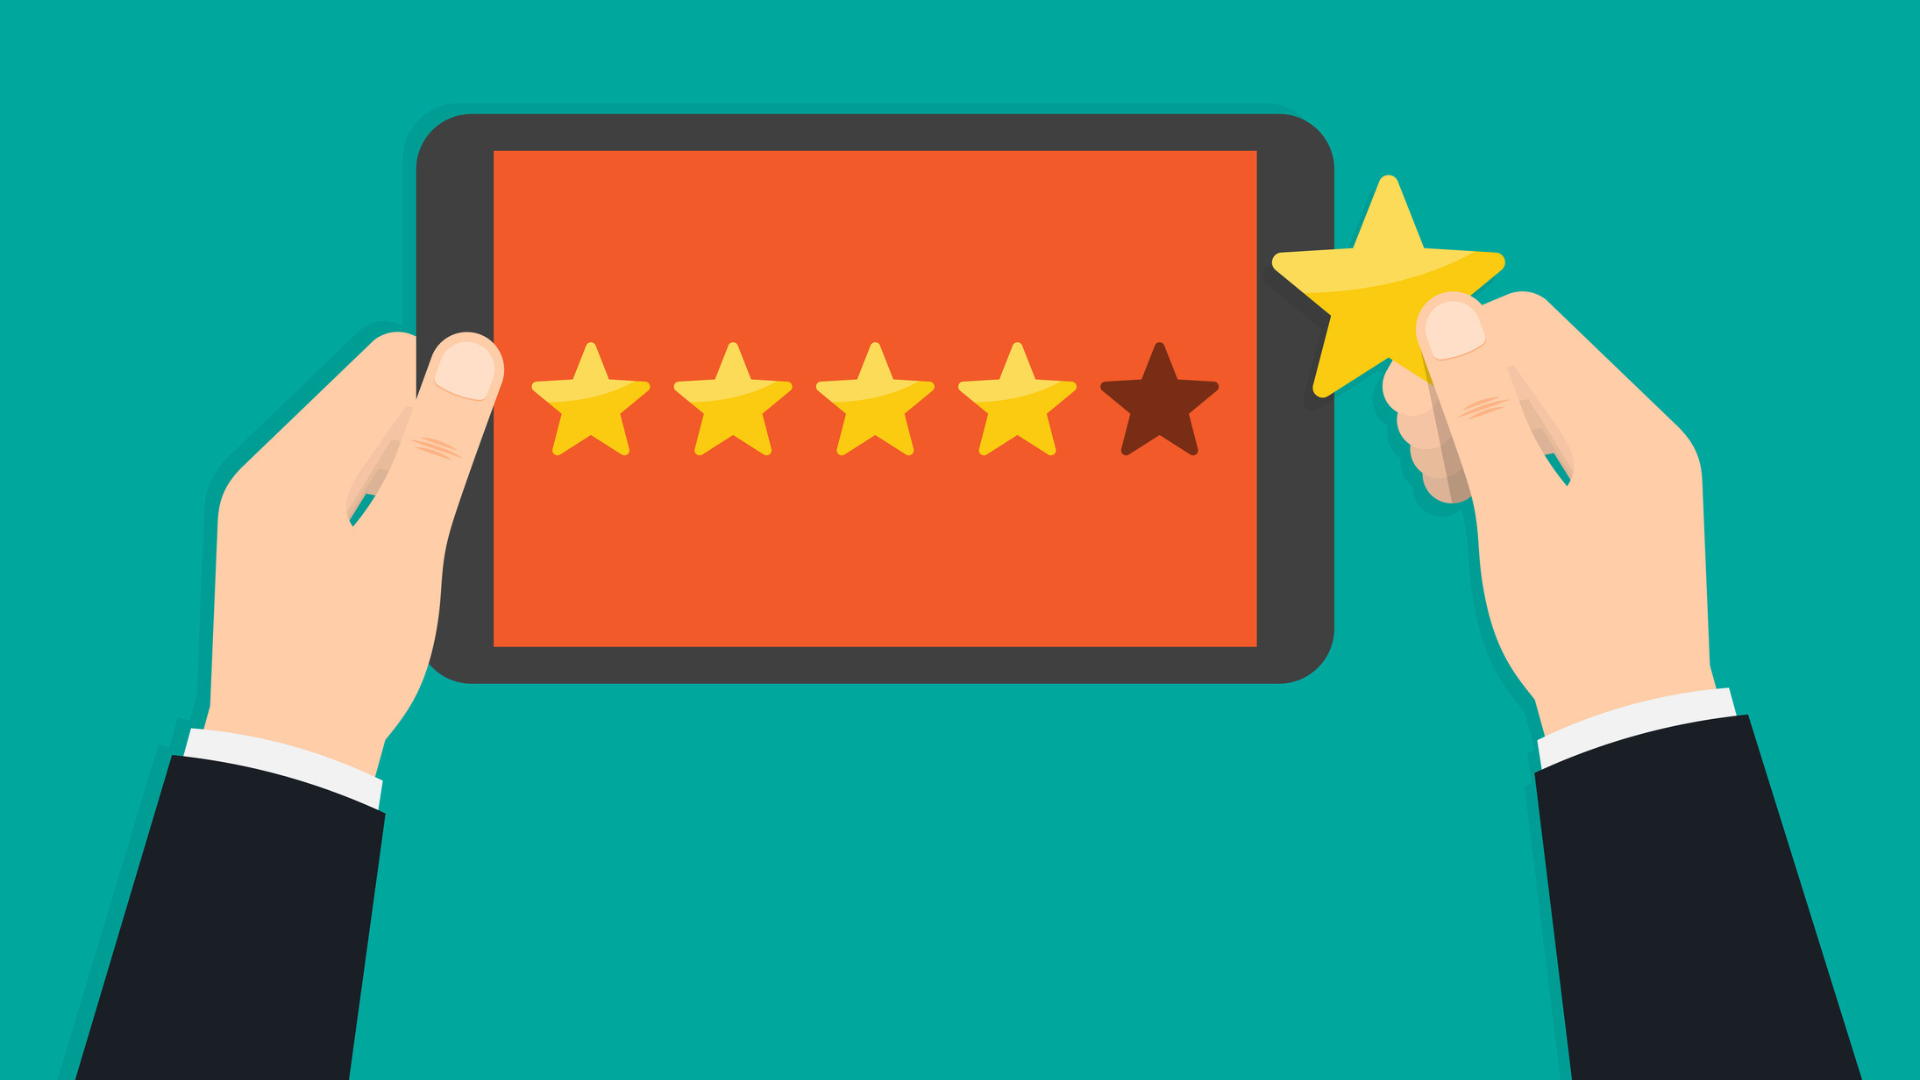 A tablet that shows 5 stars